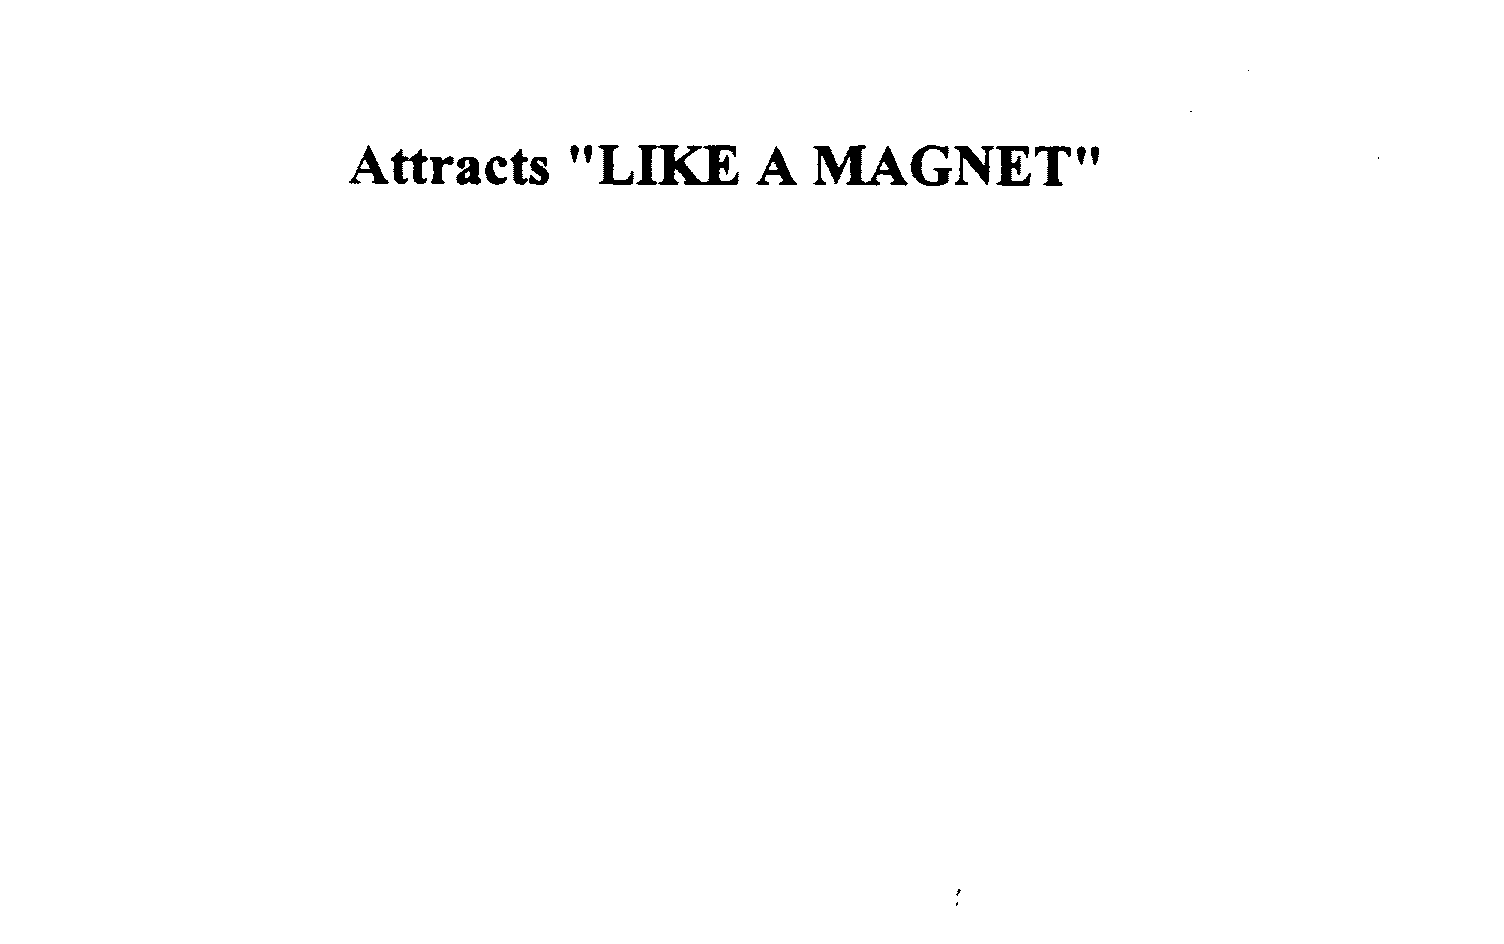  ATTRACTS "LIKE A MAGNET"